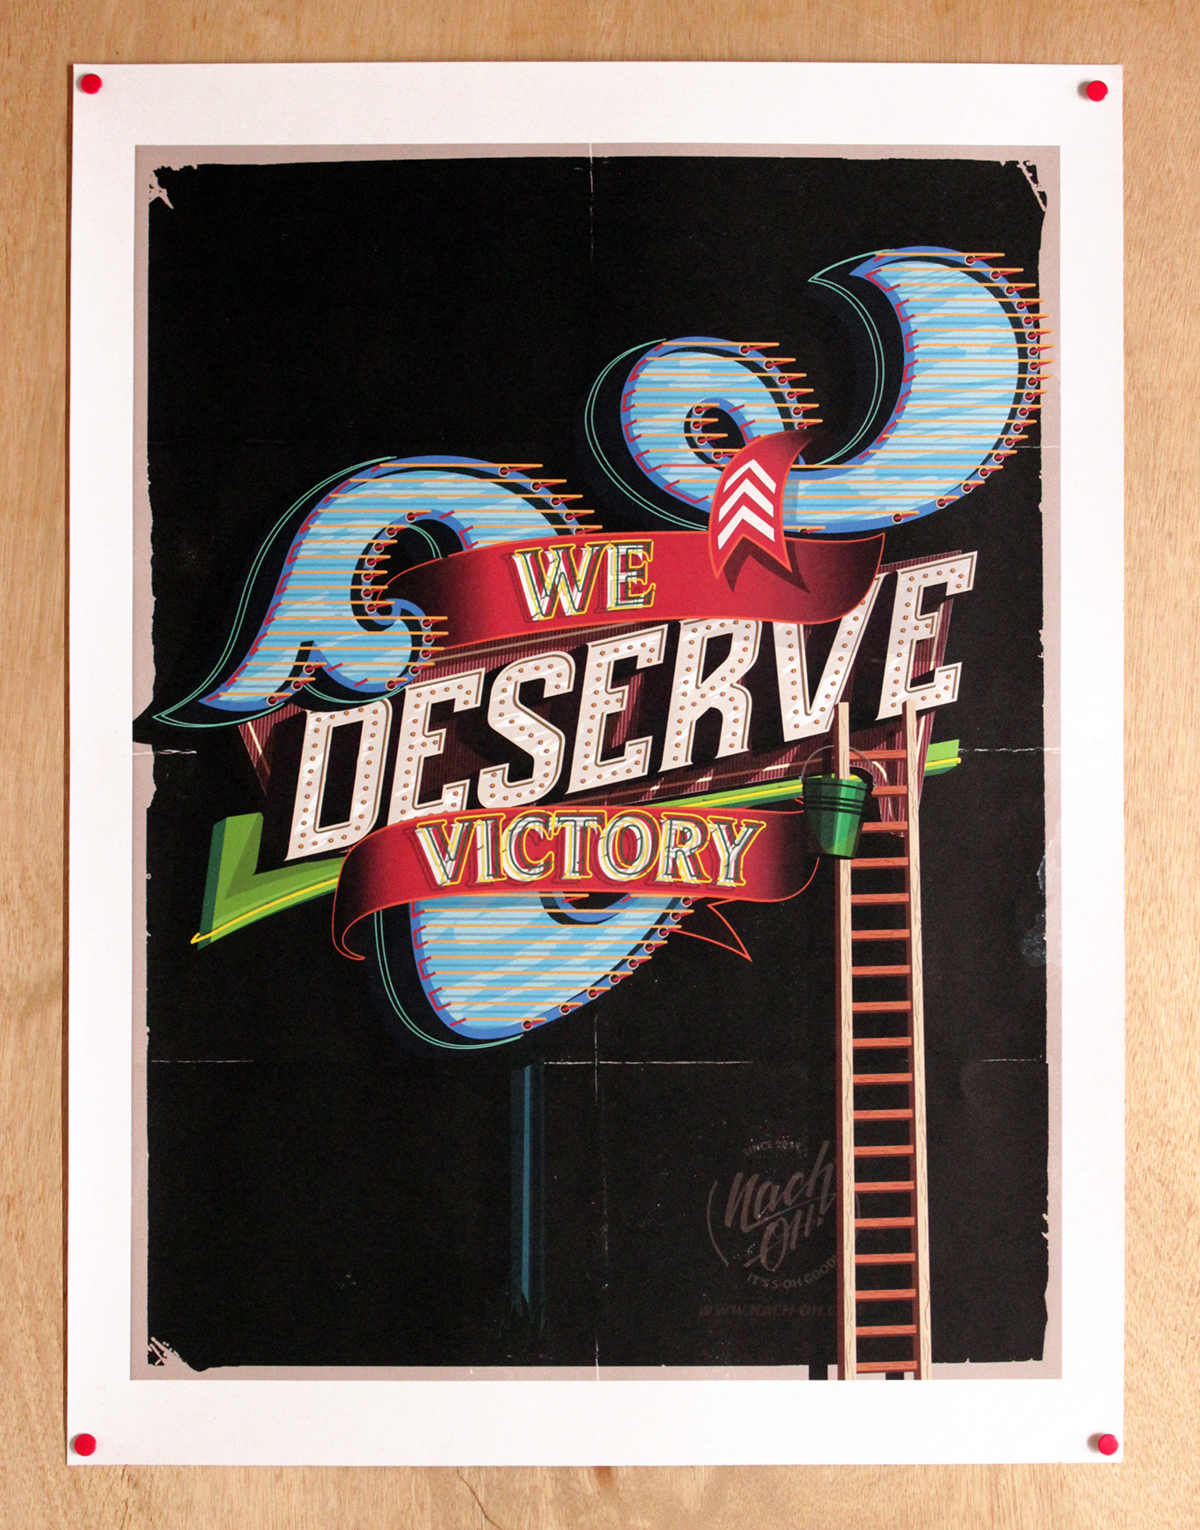 digital Victory Exhibition  neon road sign 3D colombia poster tour vector Illustrator nach oh lettering tipografia